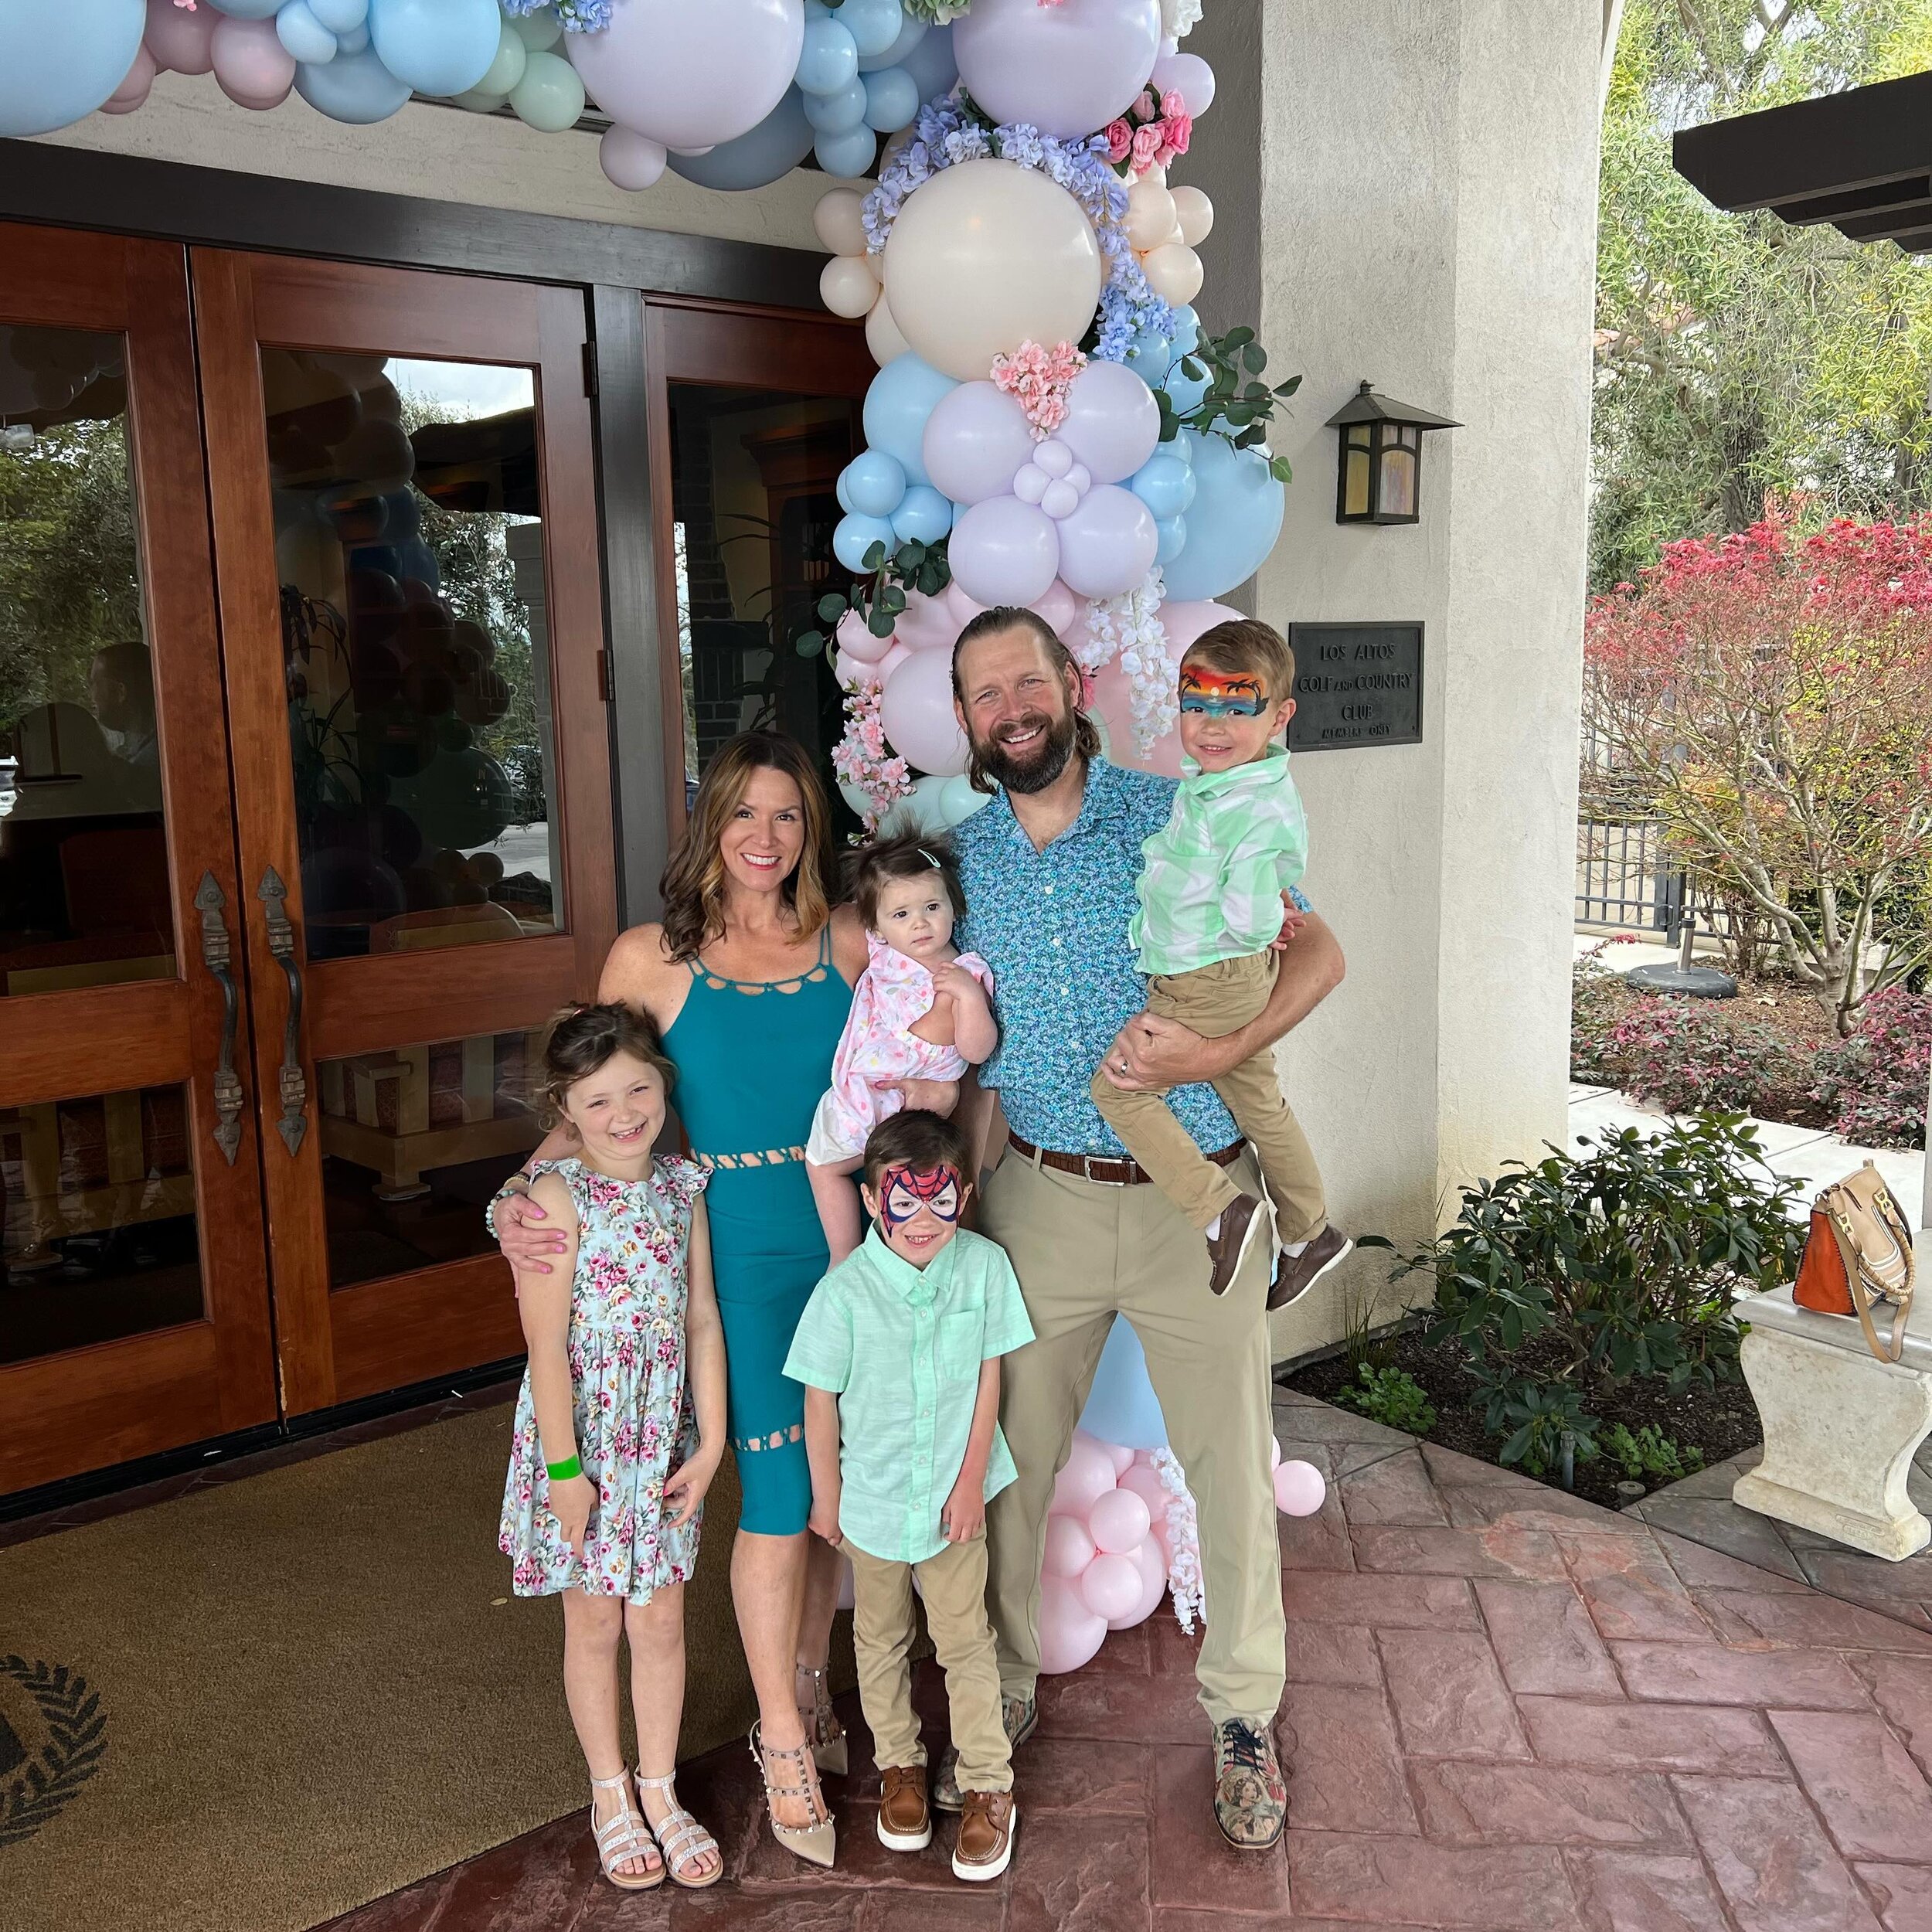 Happy Easter from my family to yours! 🐰💕 #easter #losaltos #losaltosgolfandcountryclub #lagcc